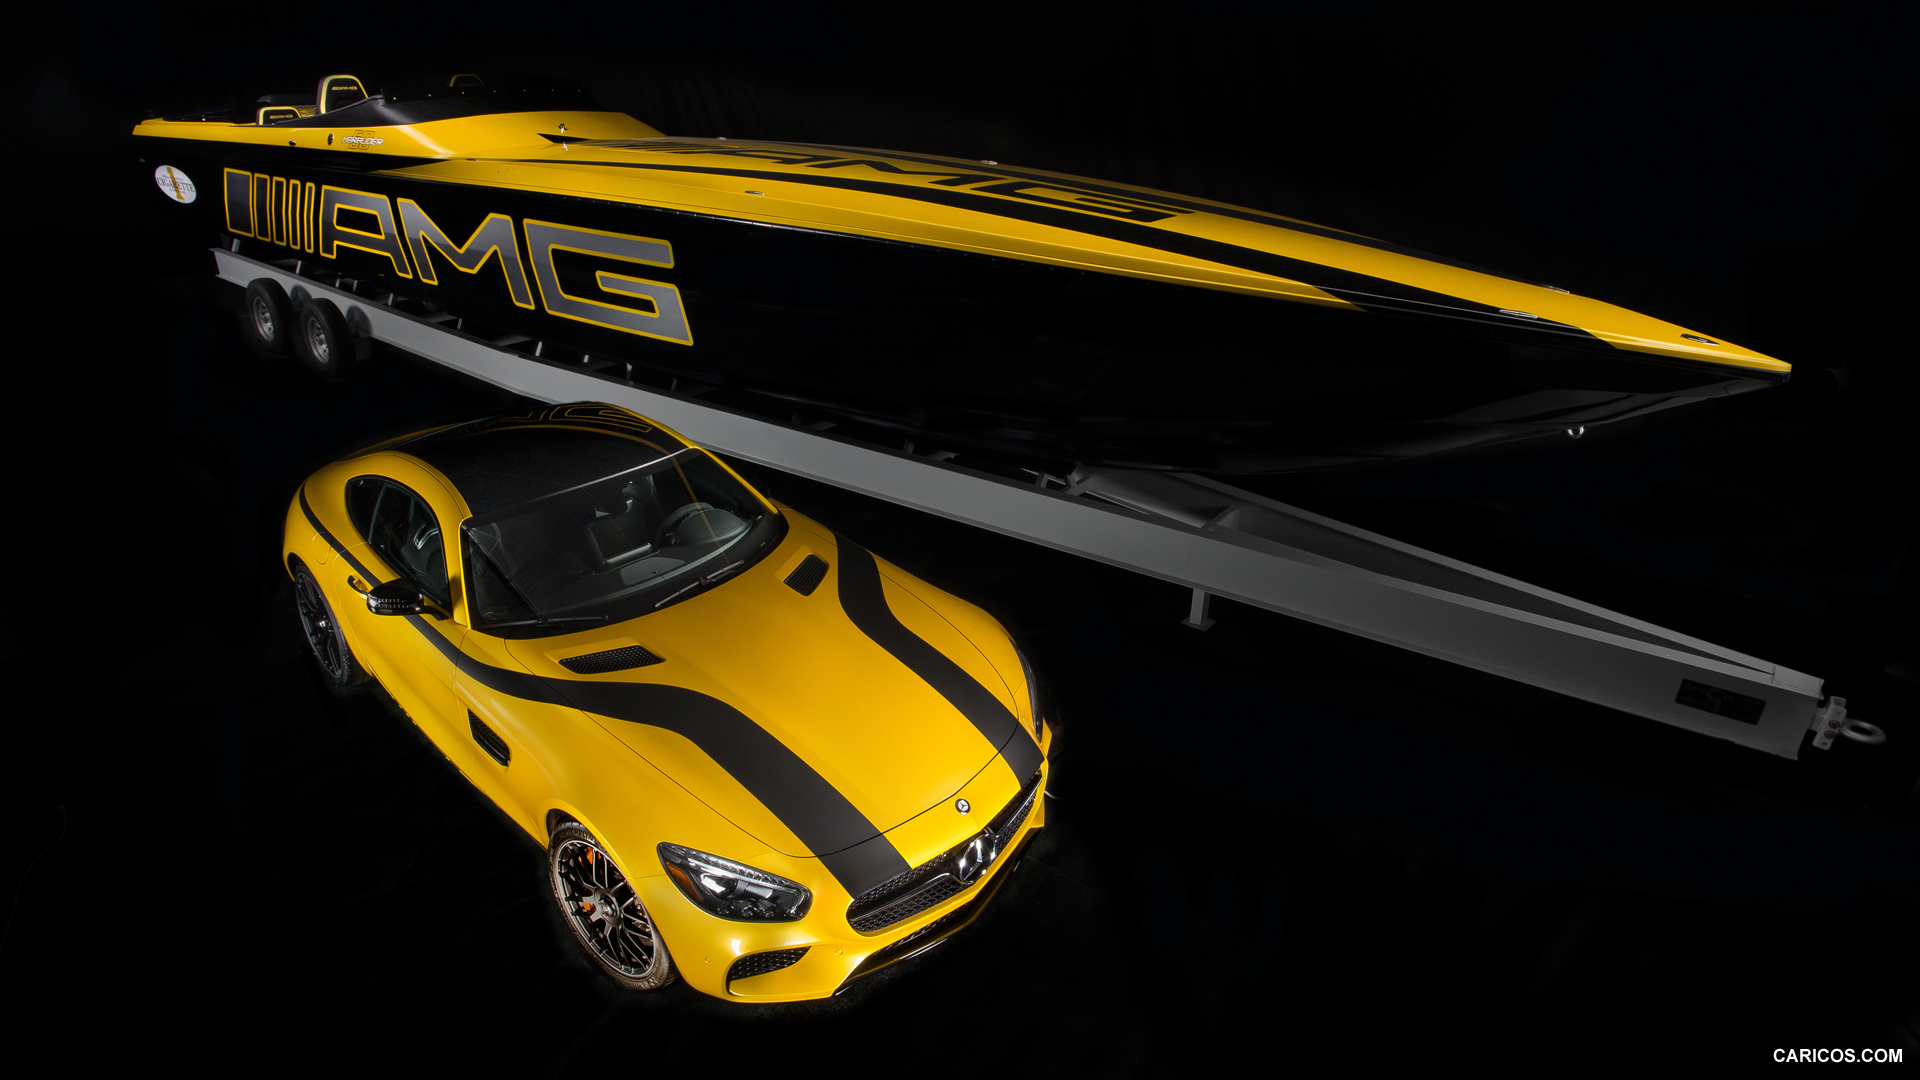 2016 Mercedes-AMG GT S and Cigarette 50 Marauder - Top, #189 of 190